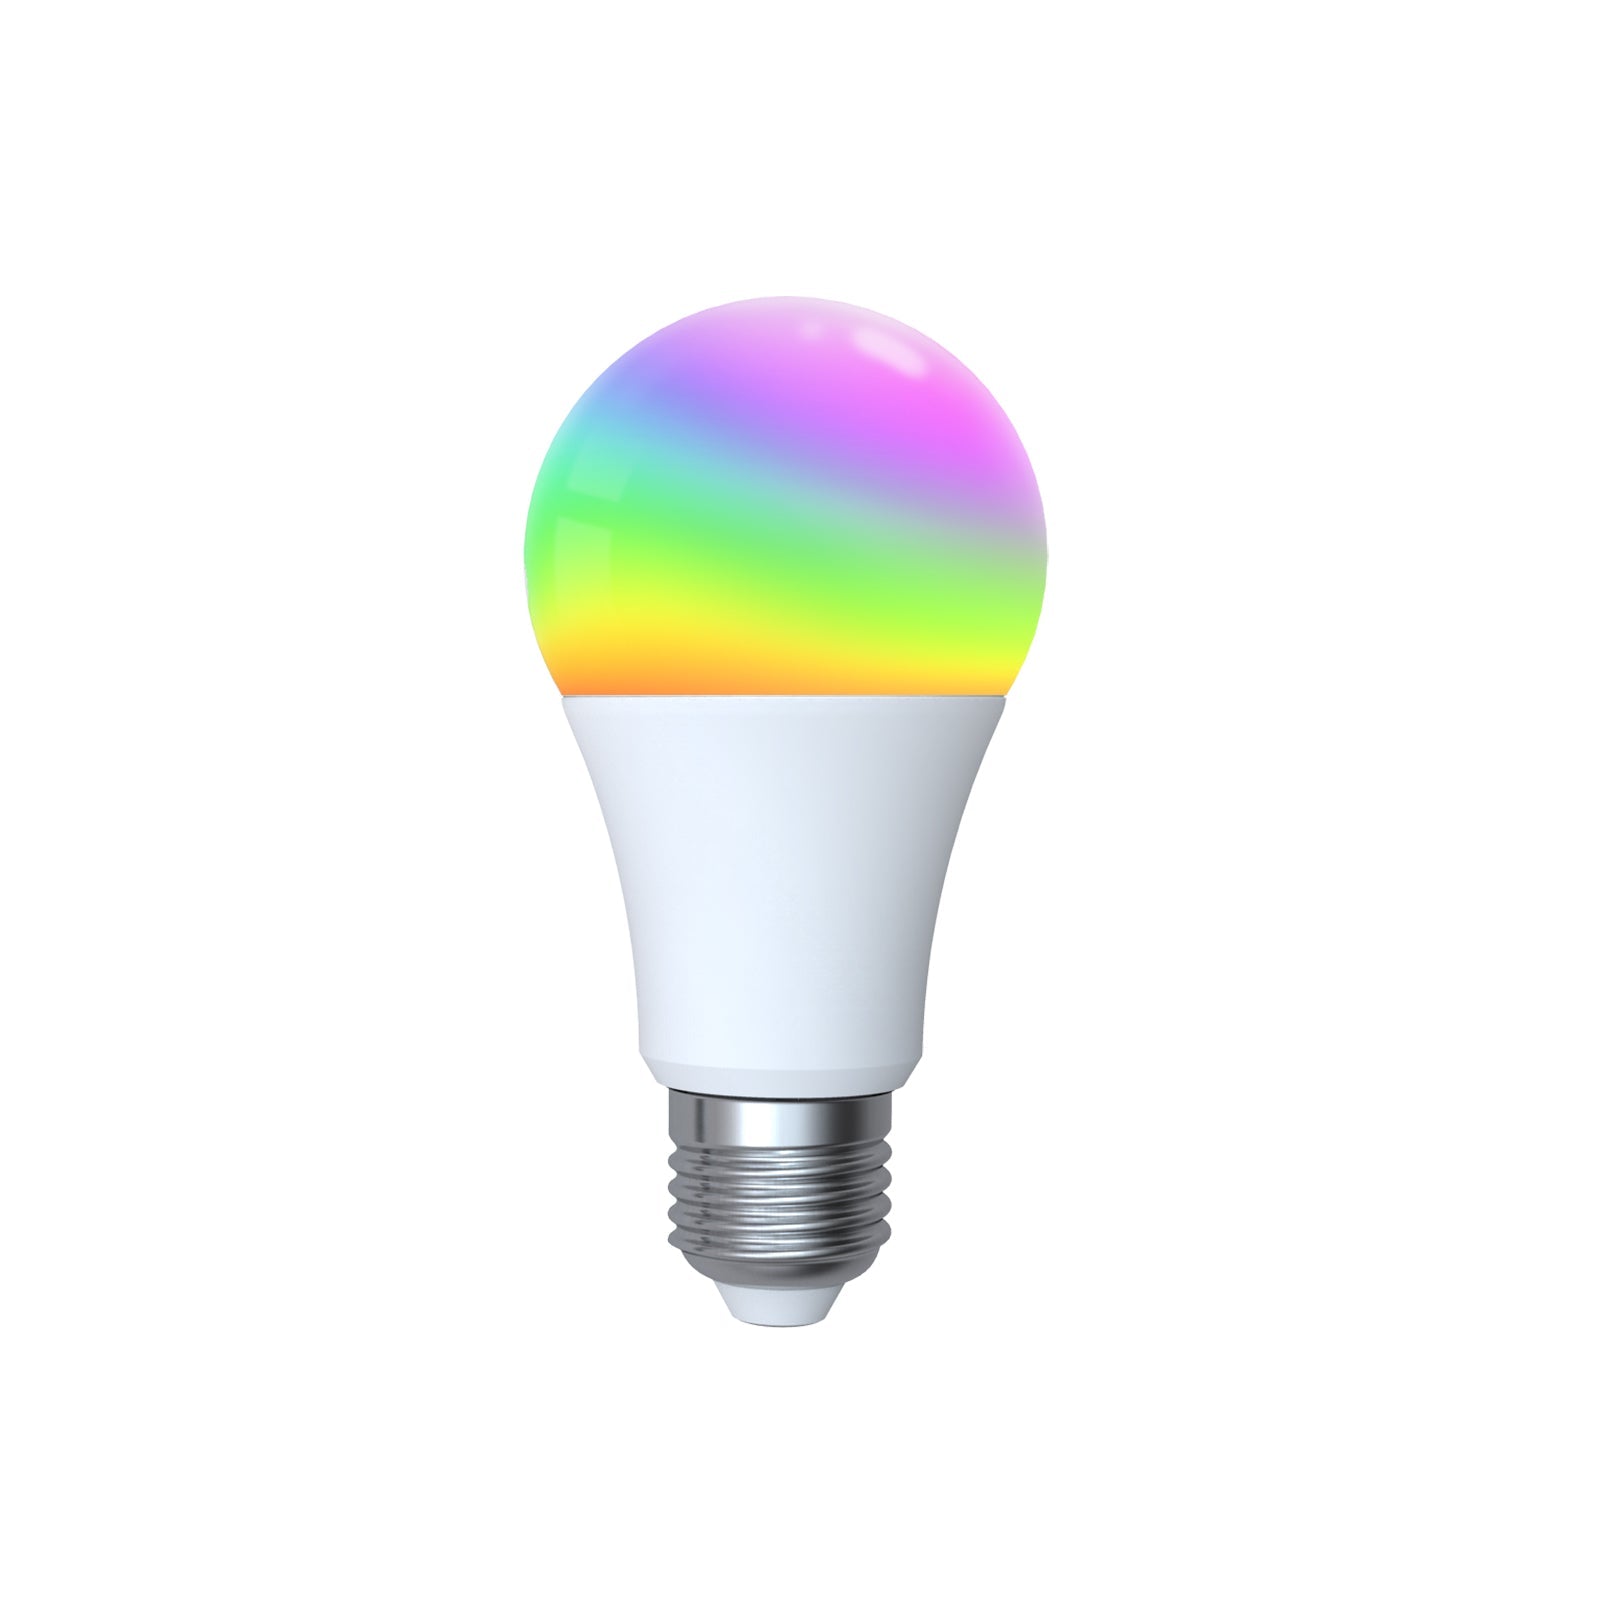 MOES ZigBee Smart LED Light Bulb Energy Efficient E27 Dimmable RGB White  Color Lamp 806Lm 9W 90-250V